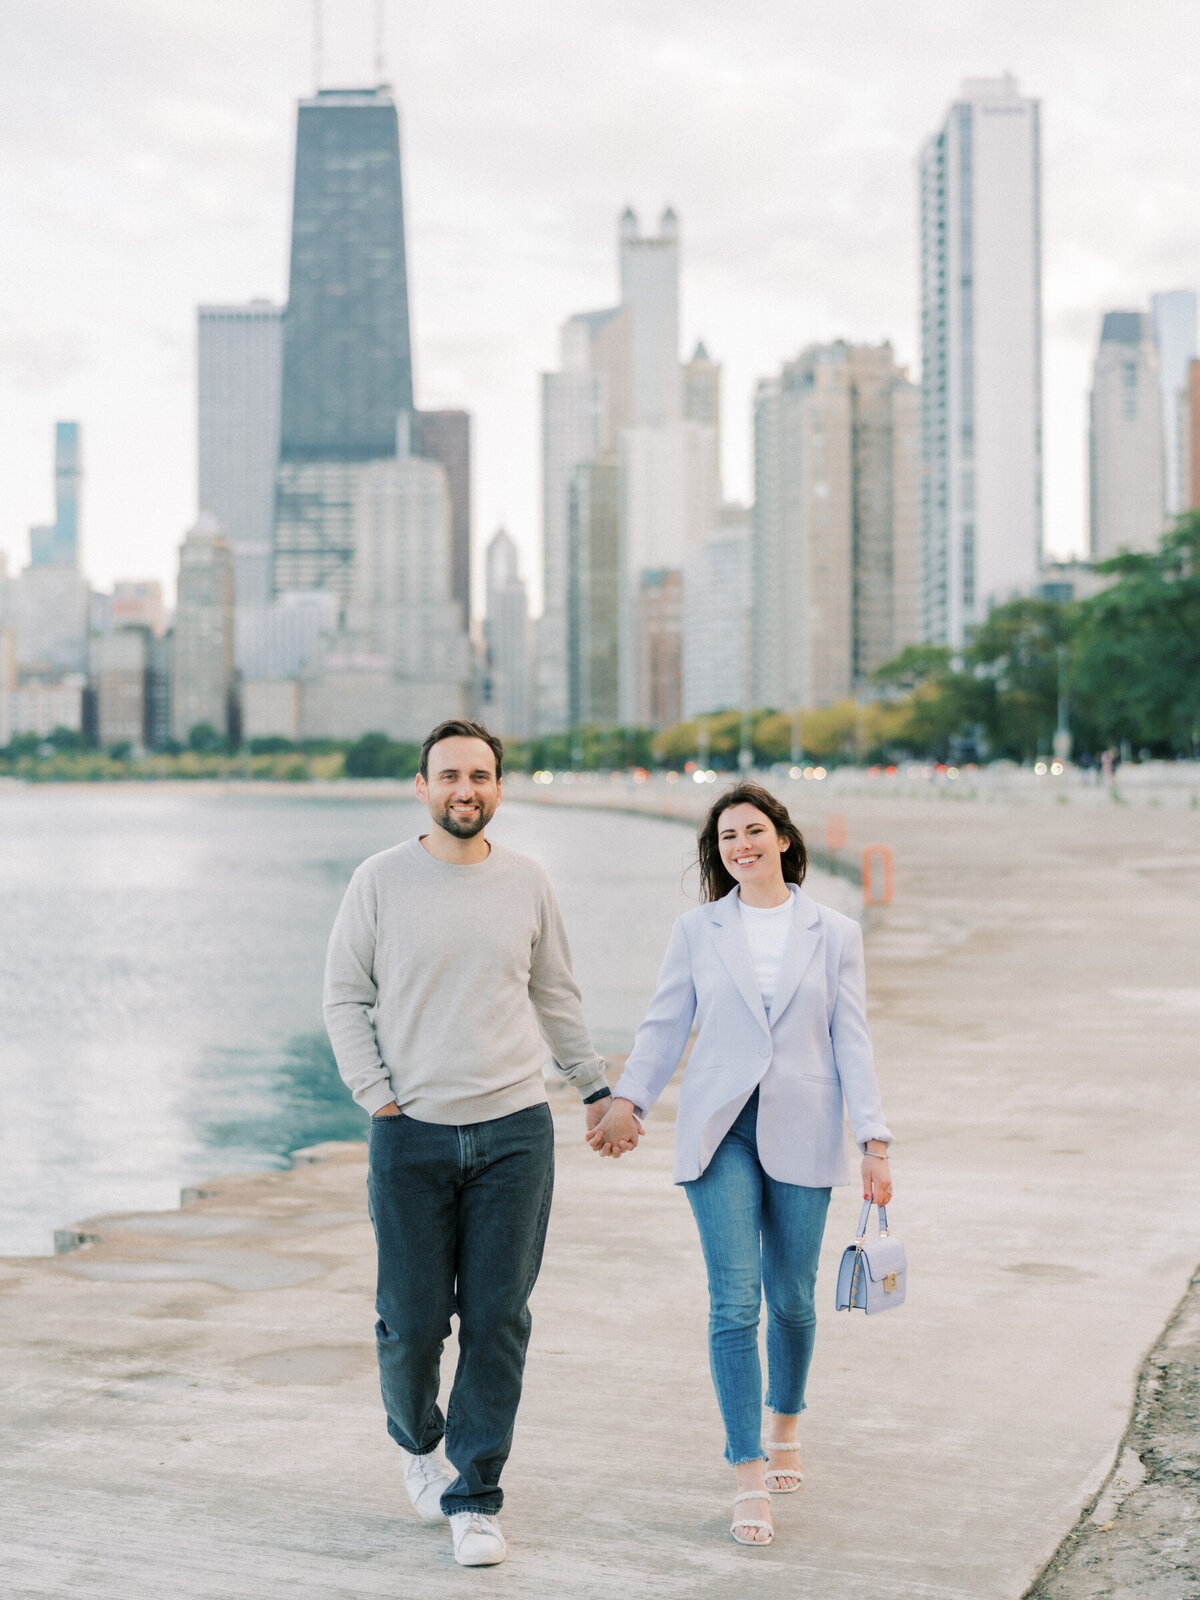 Lincoln Park Chicago Fall Engagement Session Highlights | Amarachi Ikeji Photography 22